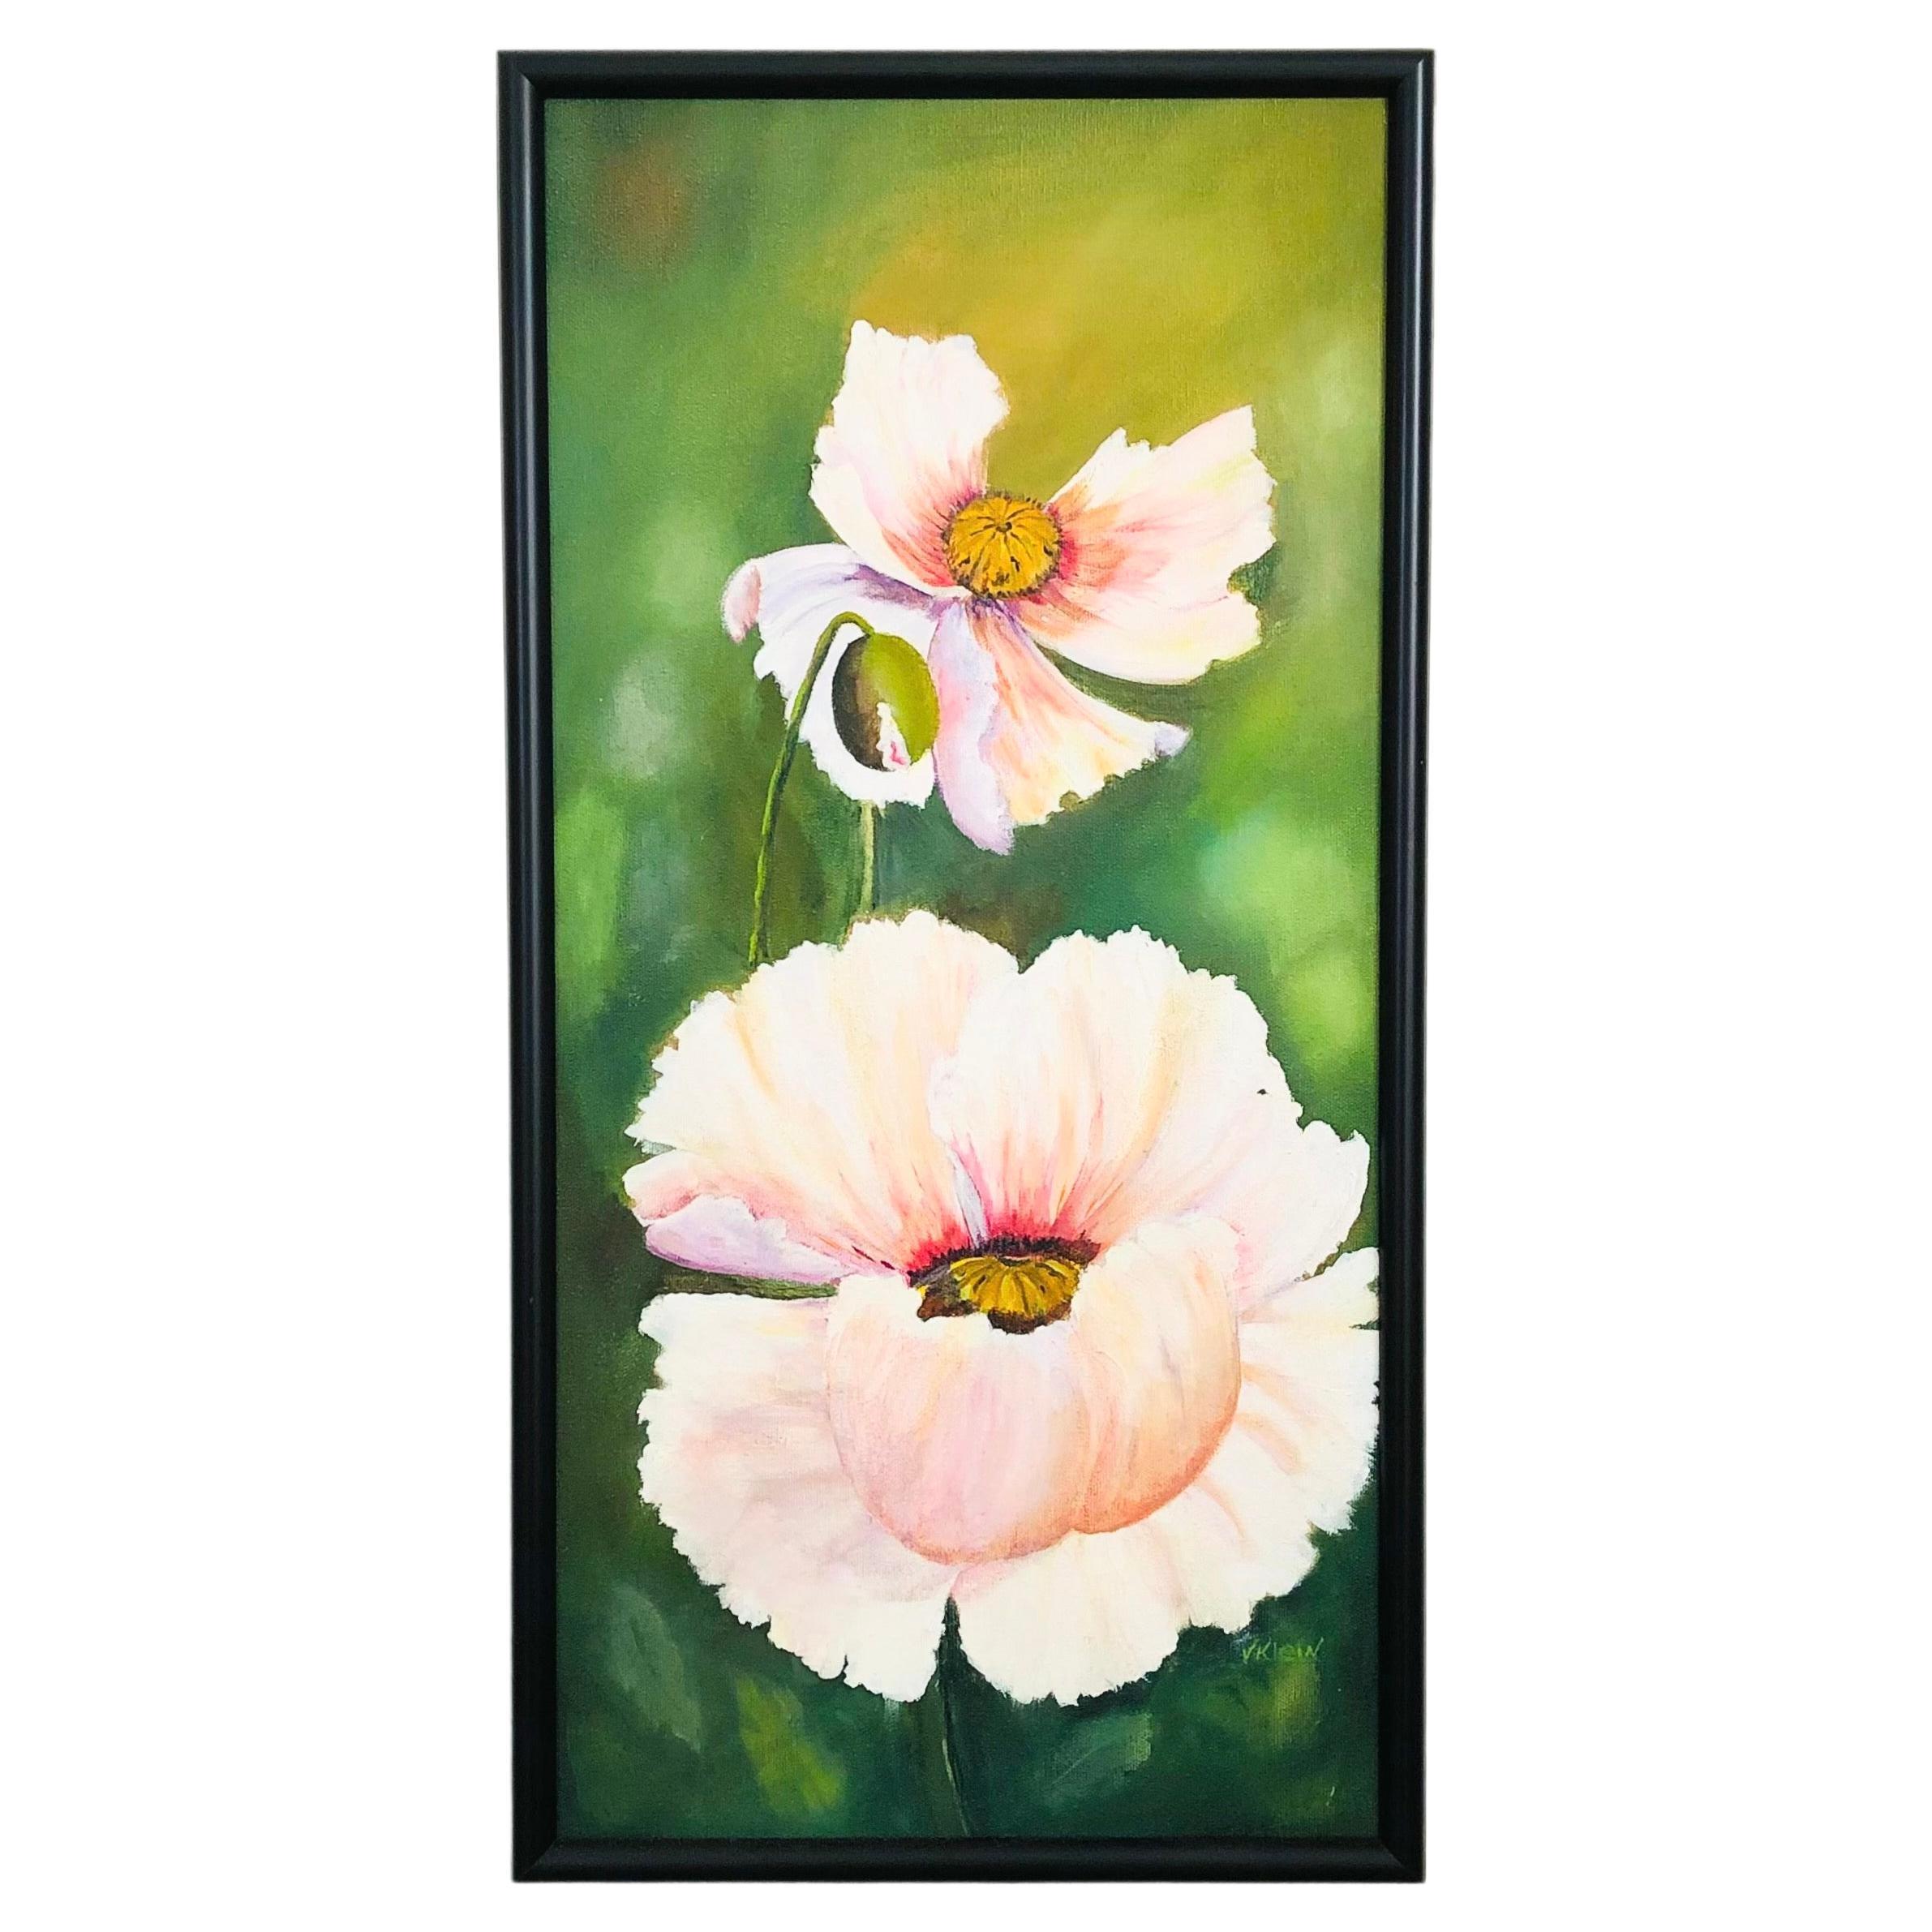 Vintage Poppy Flower Painting For Sale